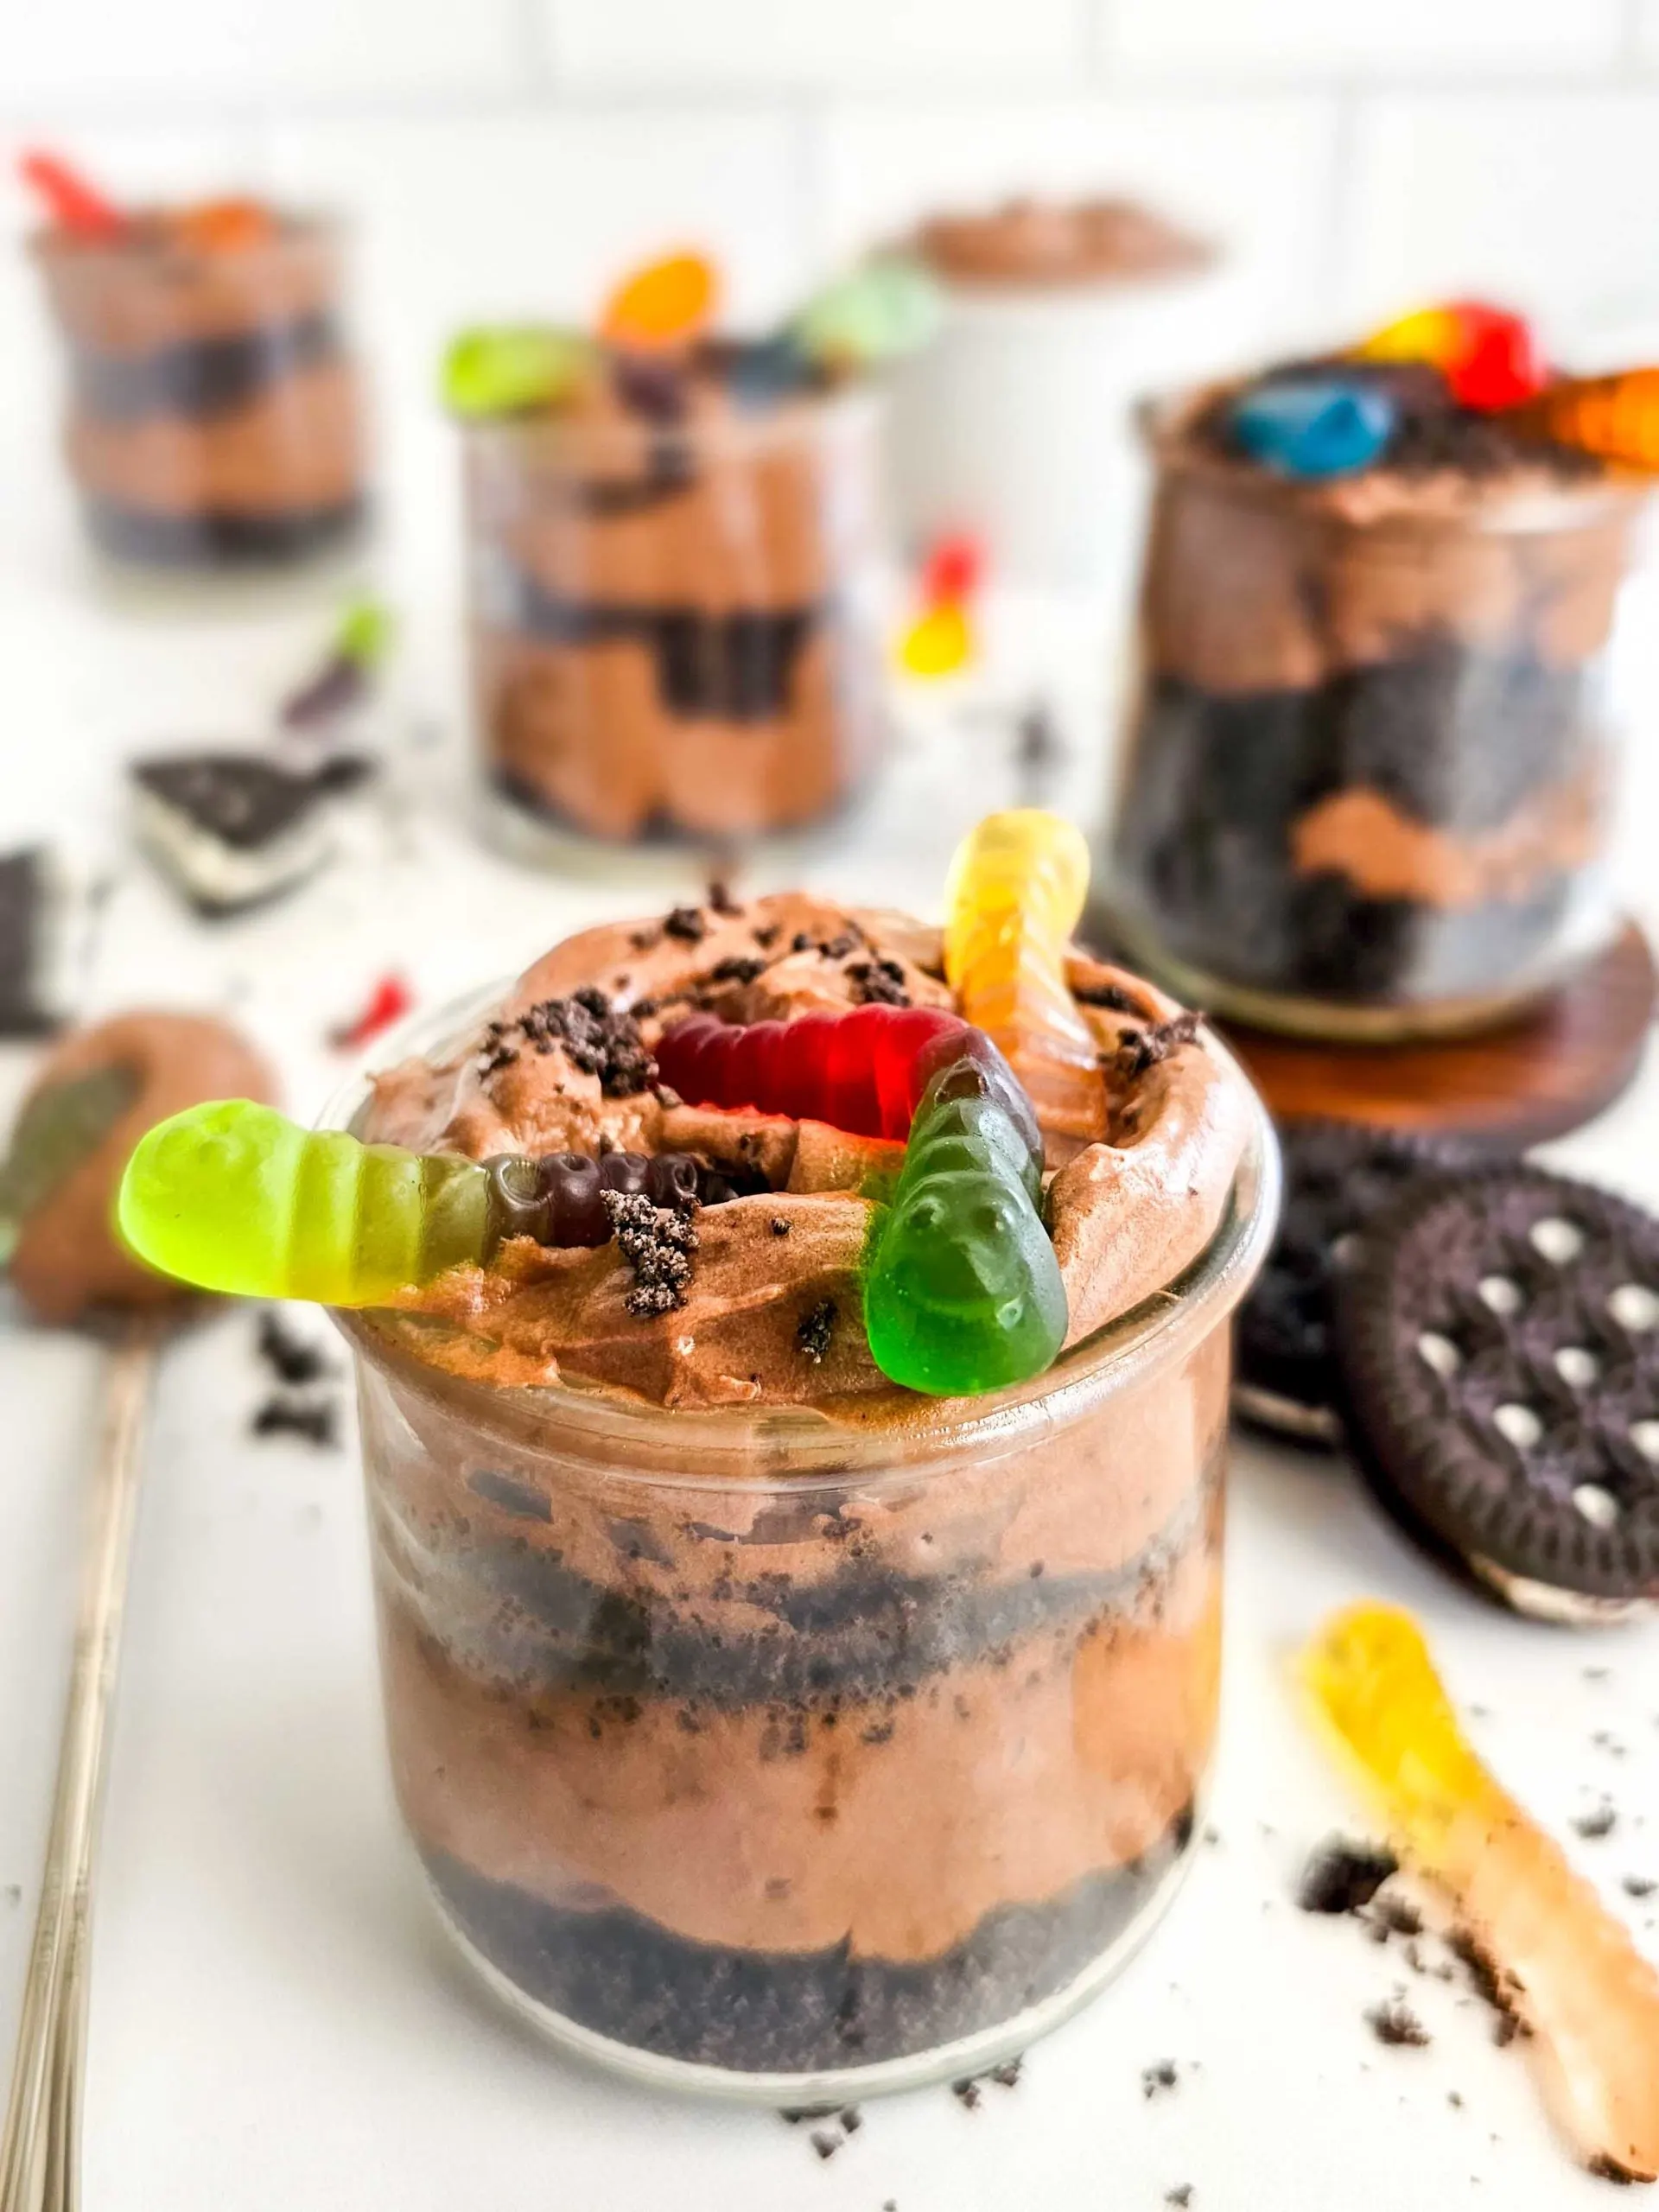 Chocolate pudding and Oreo cookie crumbs are layered in a small glass cup and topped with 3 colored gummy worms.